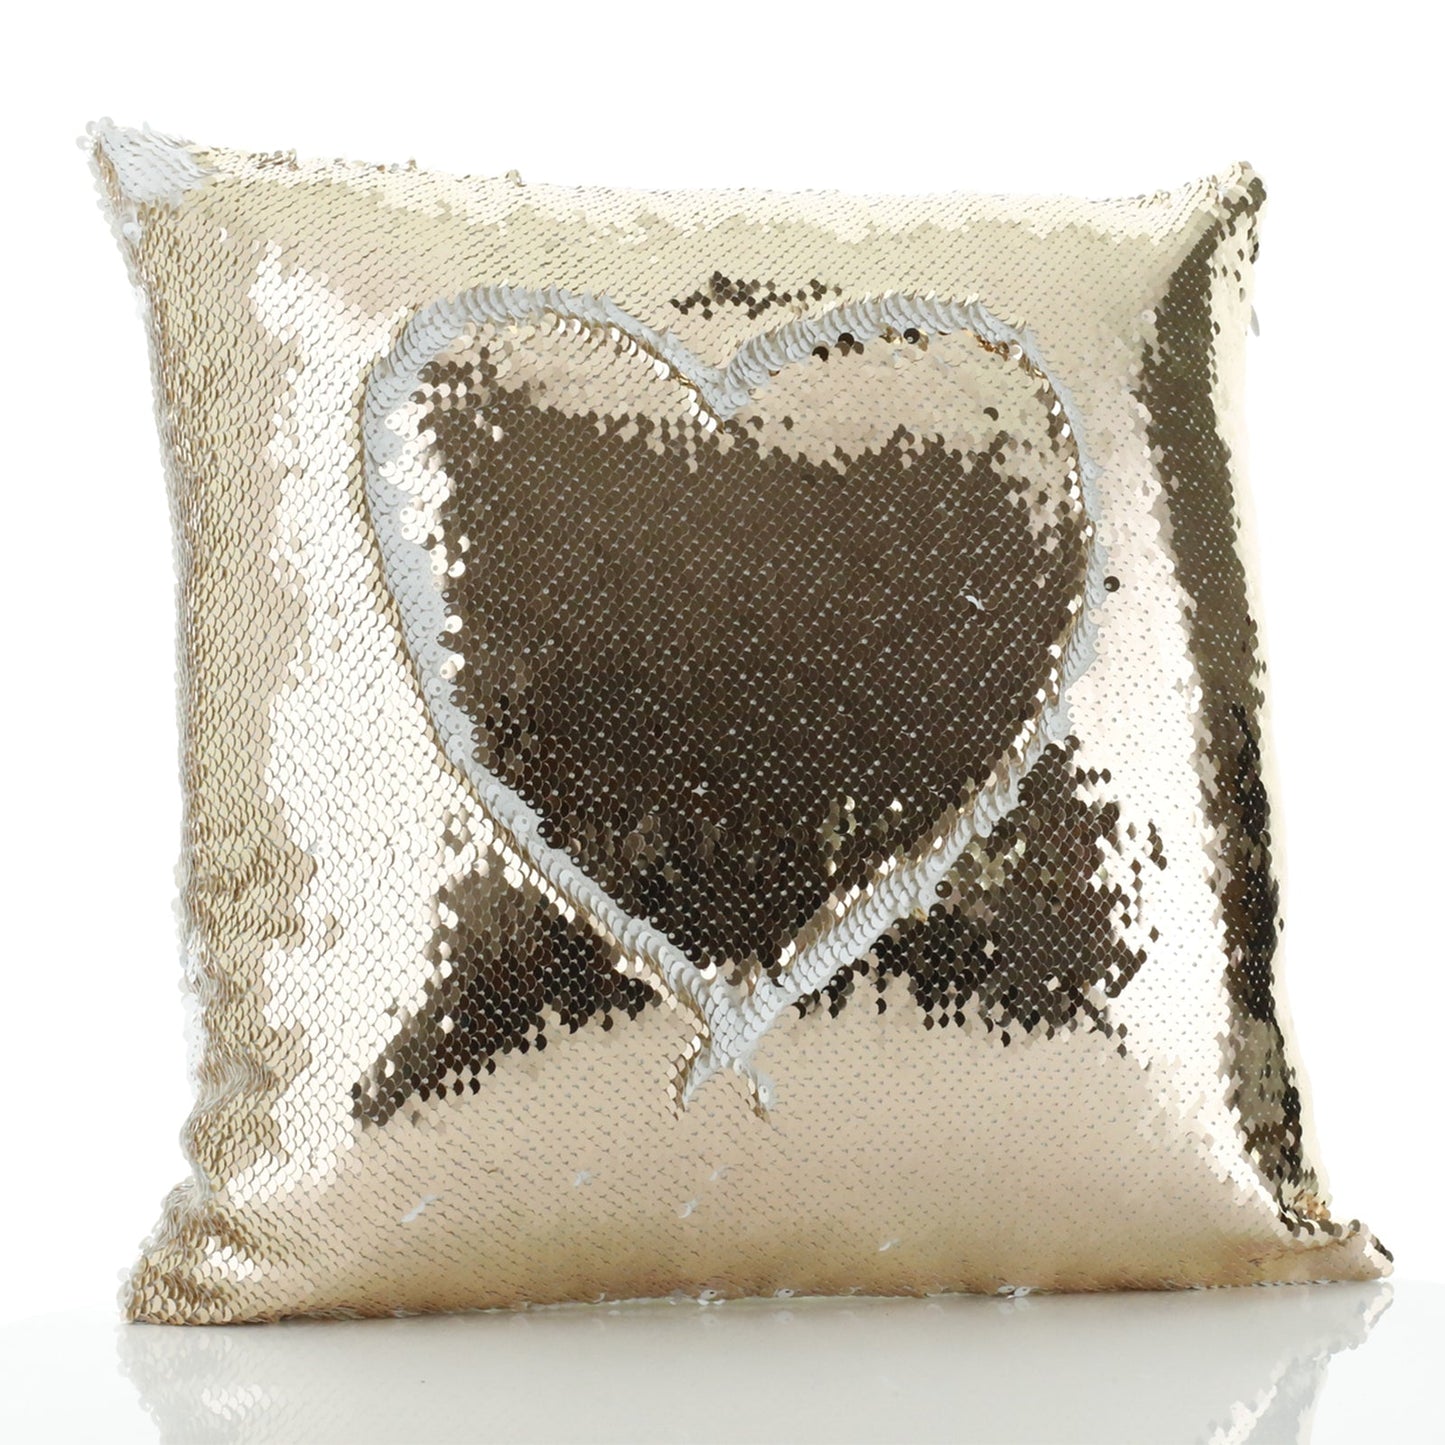 Personalised Sequin Cushion with Stylish Text and Cupid Hearts Print